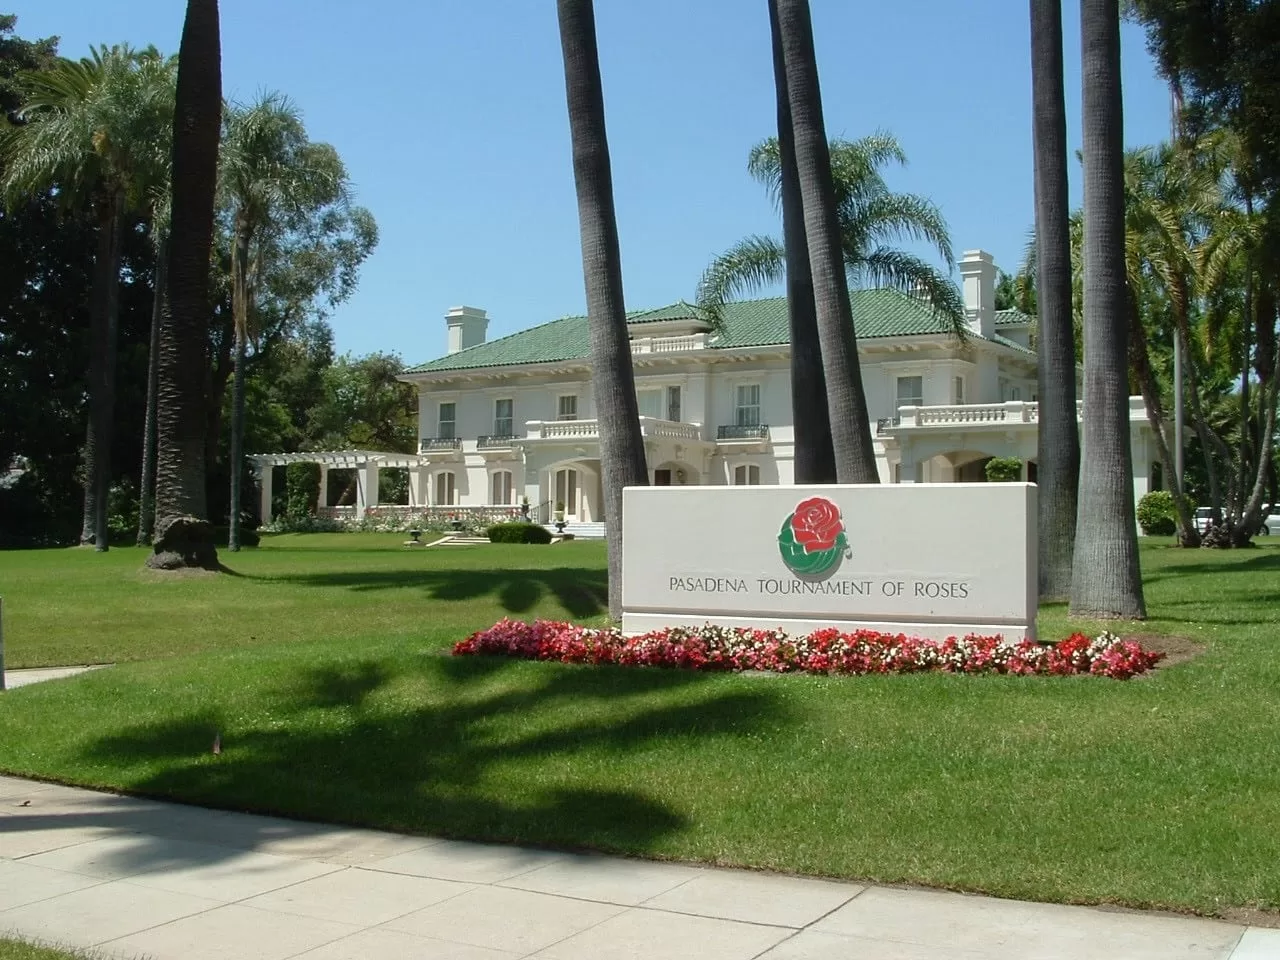 Luxurious mansion with palm trees and Tournament of Roses sign in Pasadena